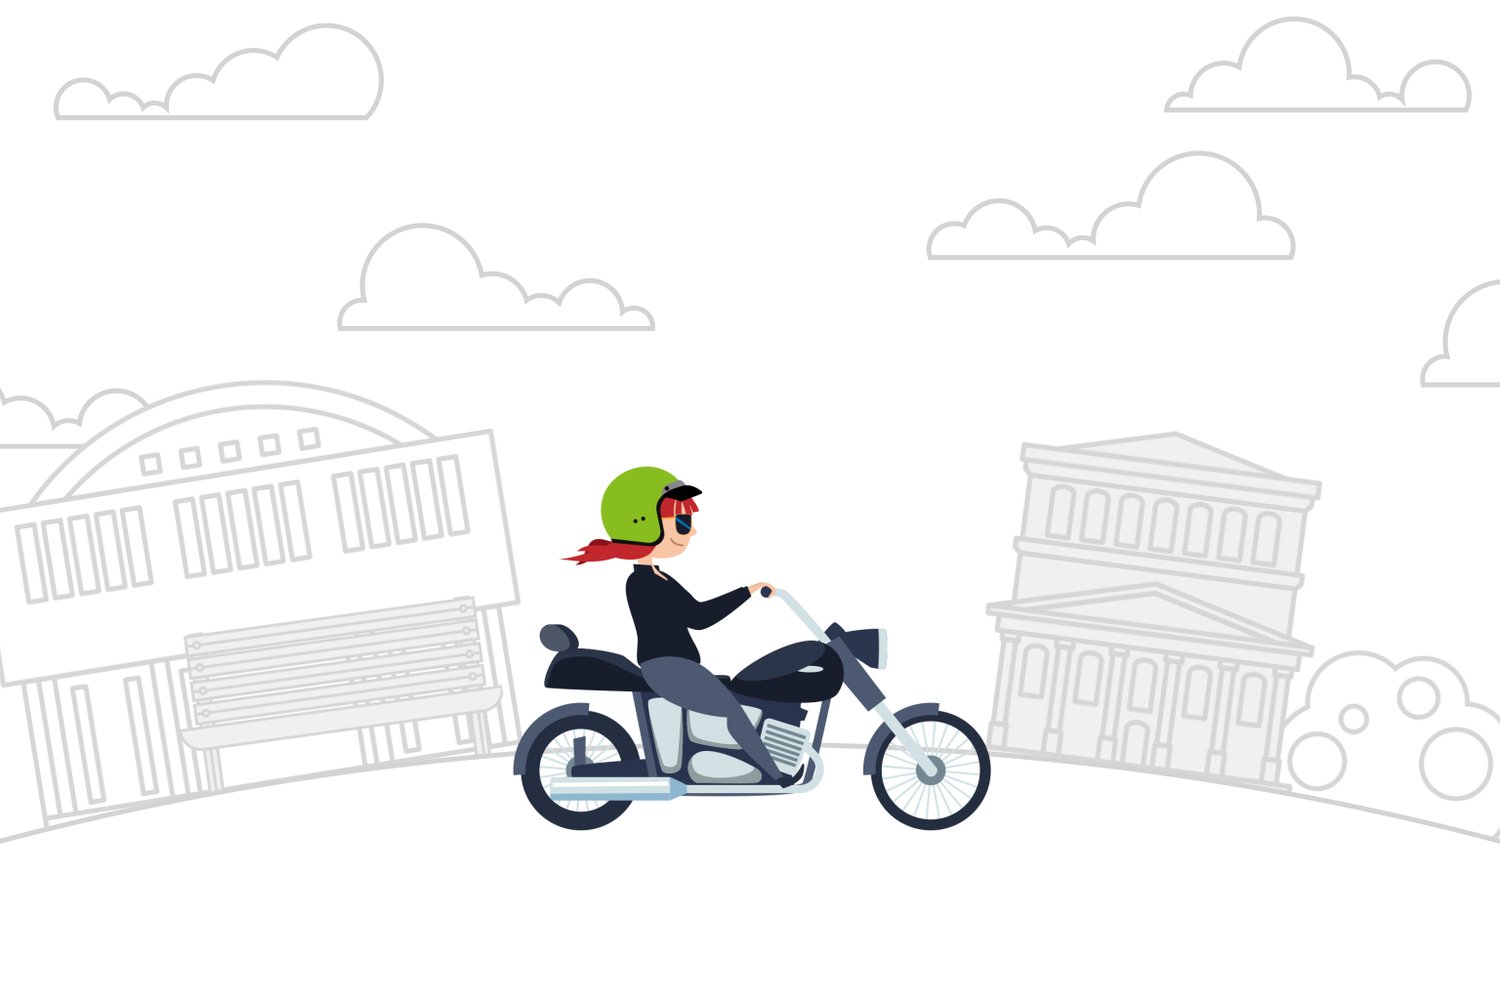 Illustration of Dialogue's Agency Director riding a motorcycle